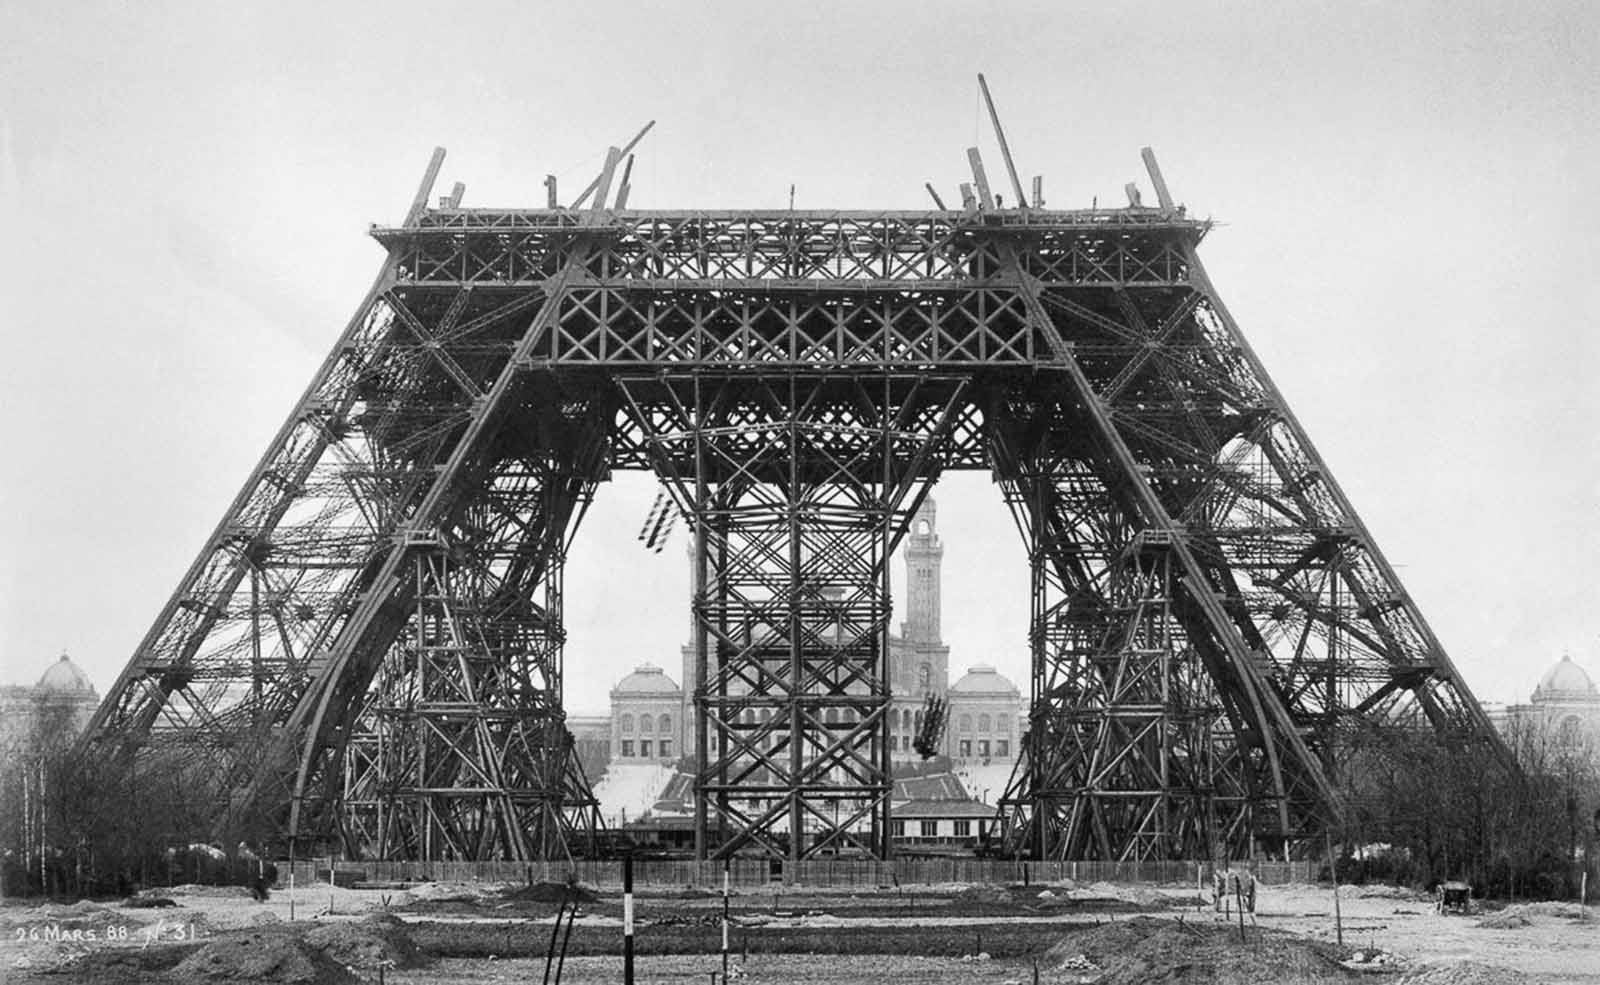 Completion of the first level. March 20, 1888.